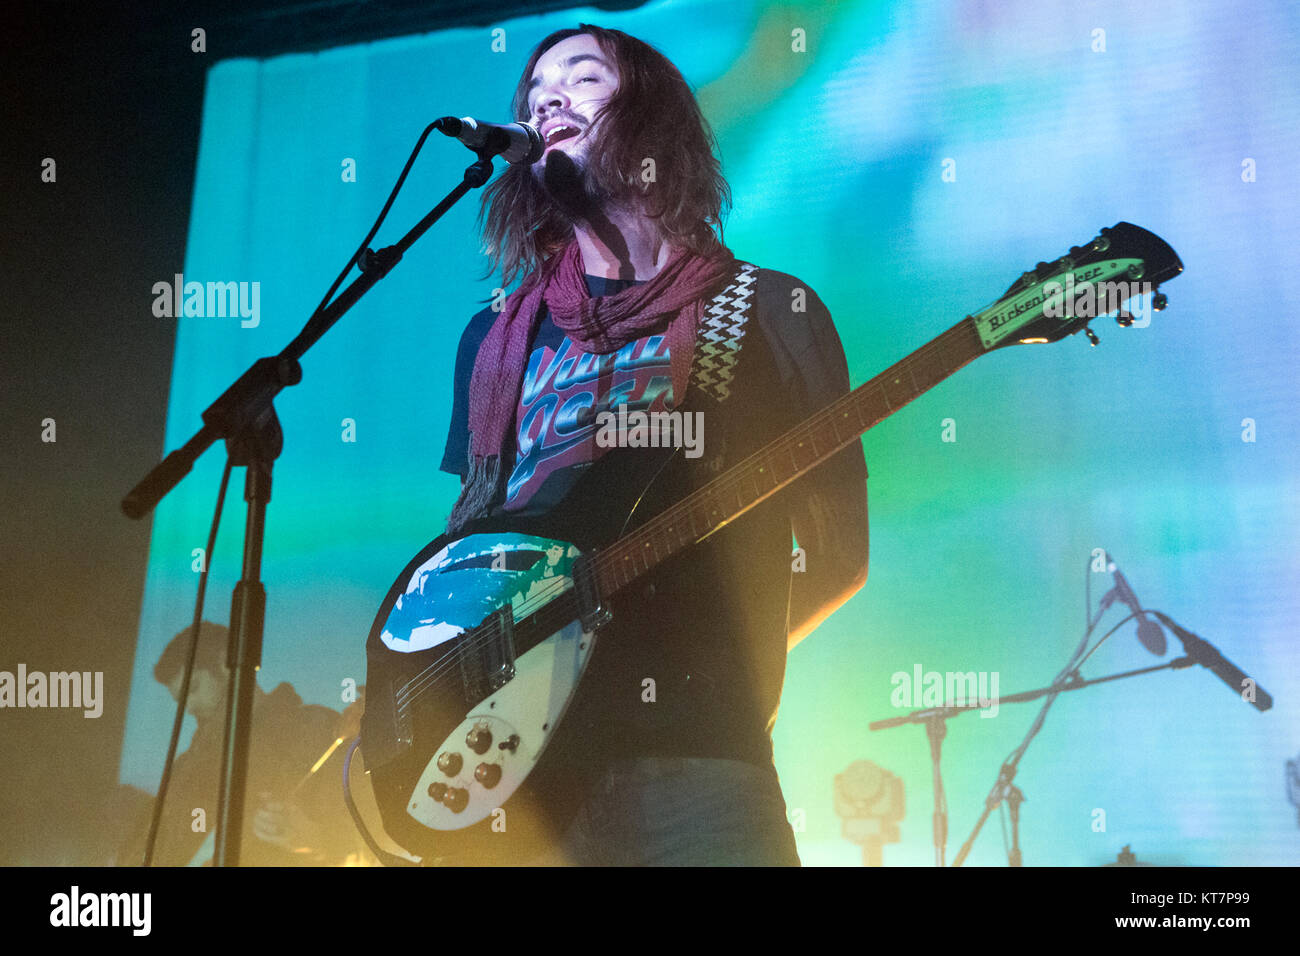 The Australian musical project Tame Impala performs a live concert at Sentrum Scene in Oslo. Here guitarist and musician Kevin Parker is seen live on stage. Norway, 04/02 2016. Stock Photo